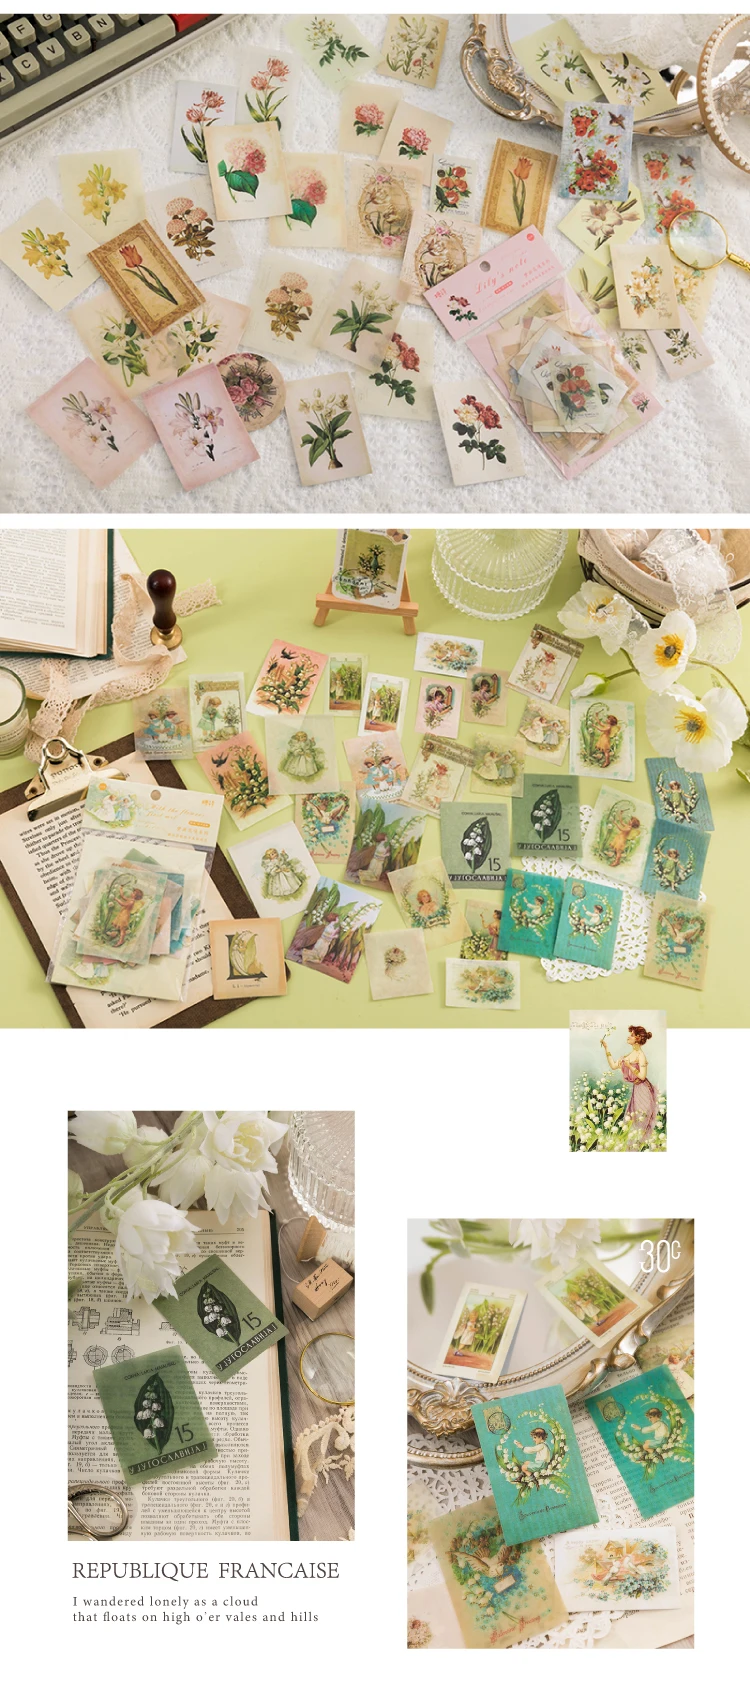 40 pcs Lily of the Valley Hydrangea Flower Fairy Retro Plant Illustrated Stickers Plant Decorative Diary Scrapbooking material